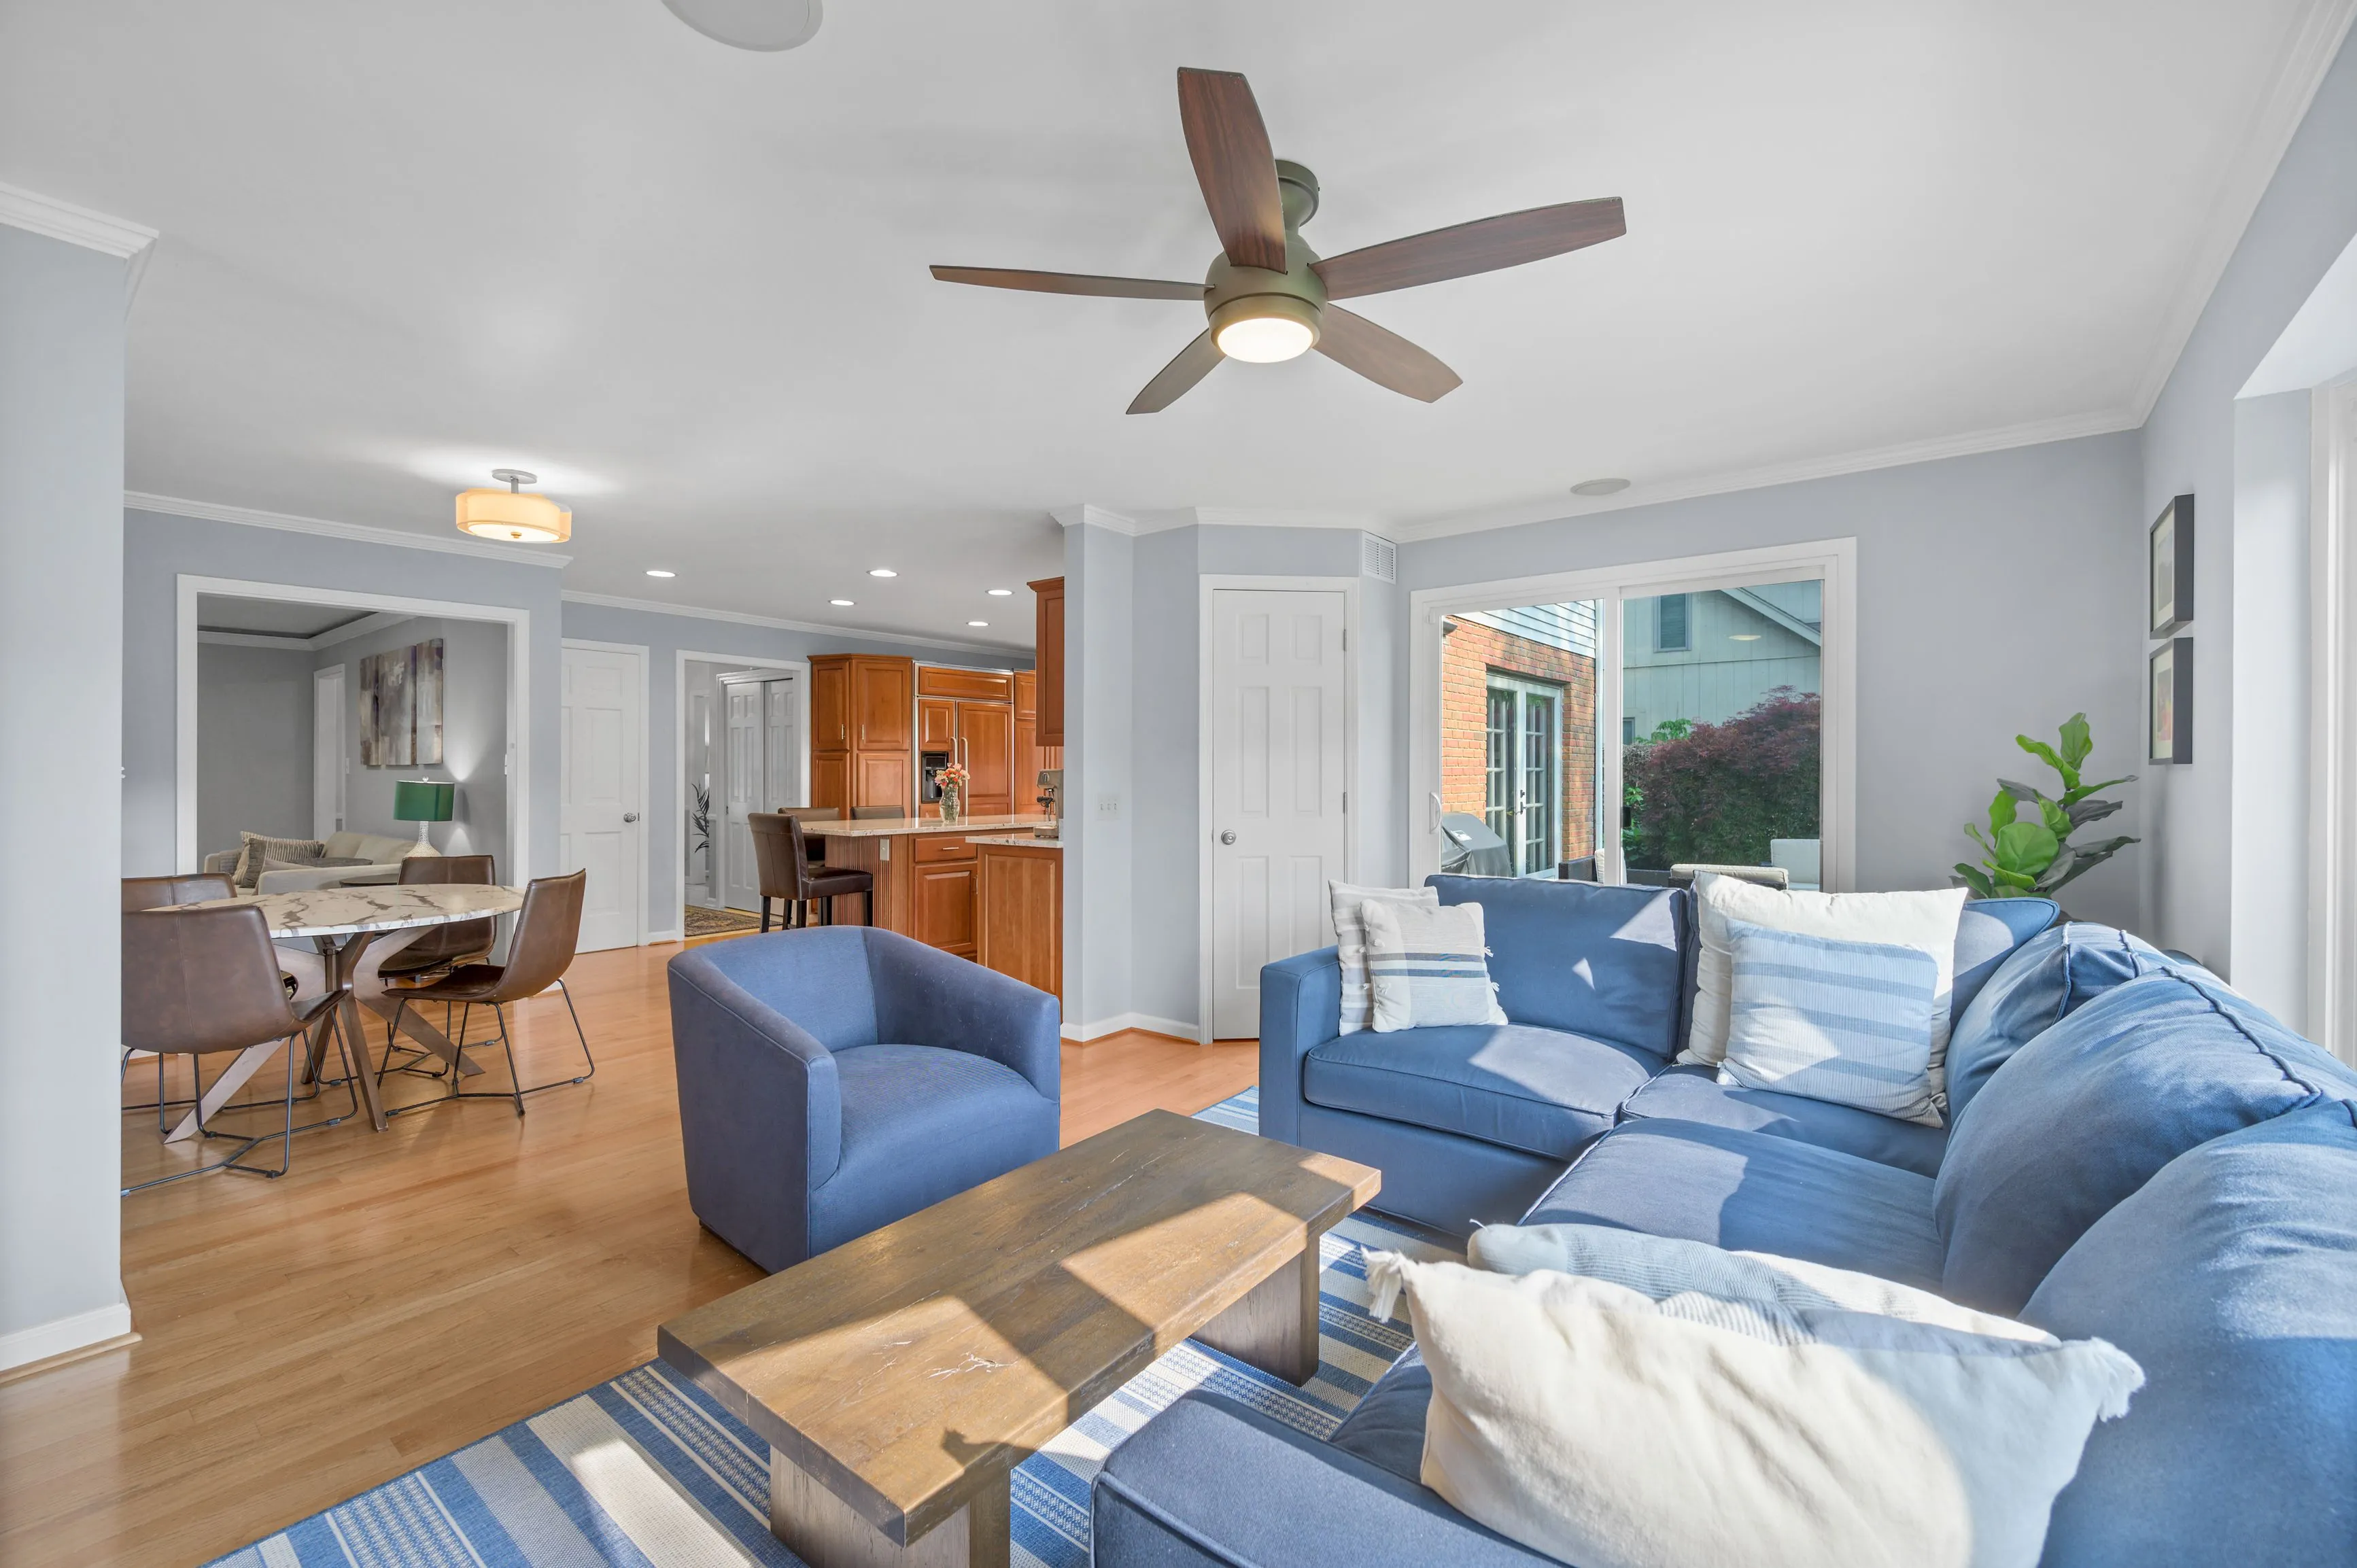 Bright cozy living room with blue sofas, white walls, hardwood floors, and a ceiling fan, adjacent to a dining area and kitchen.